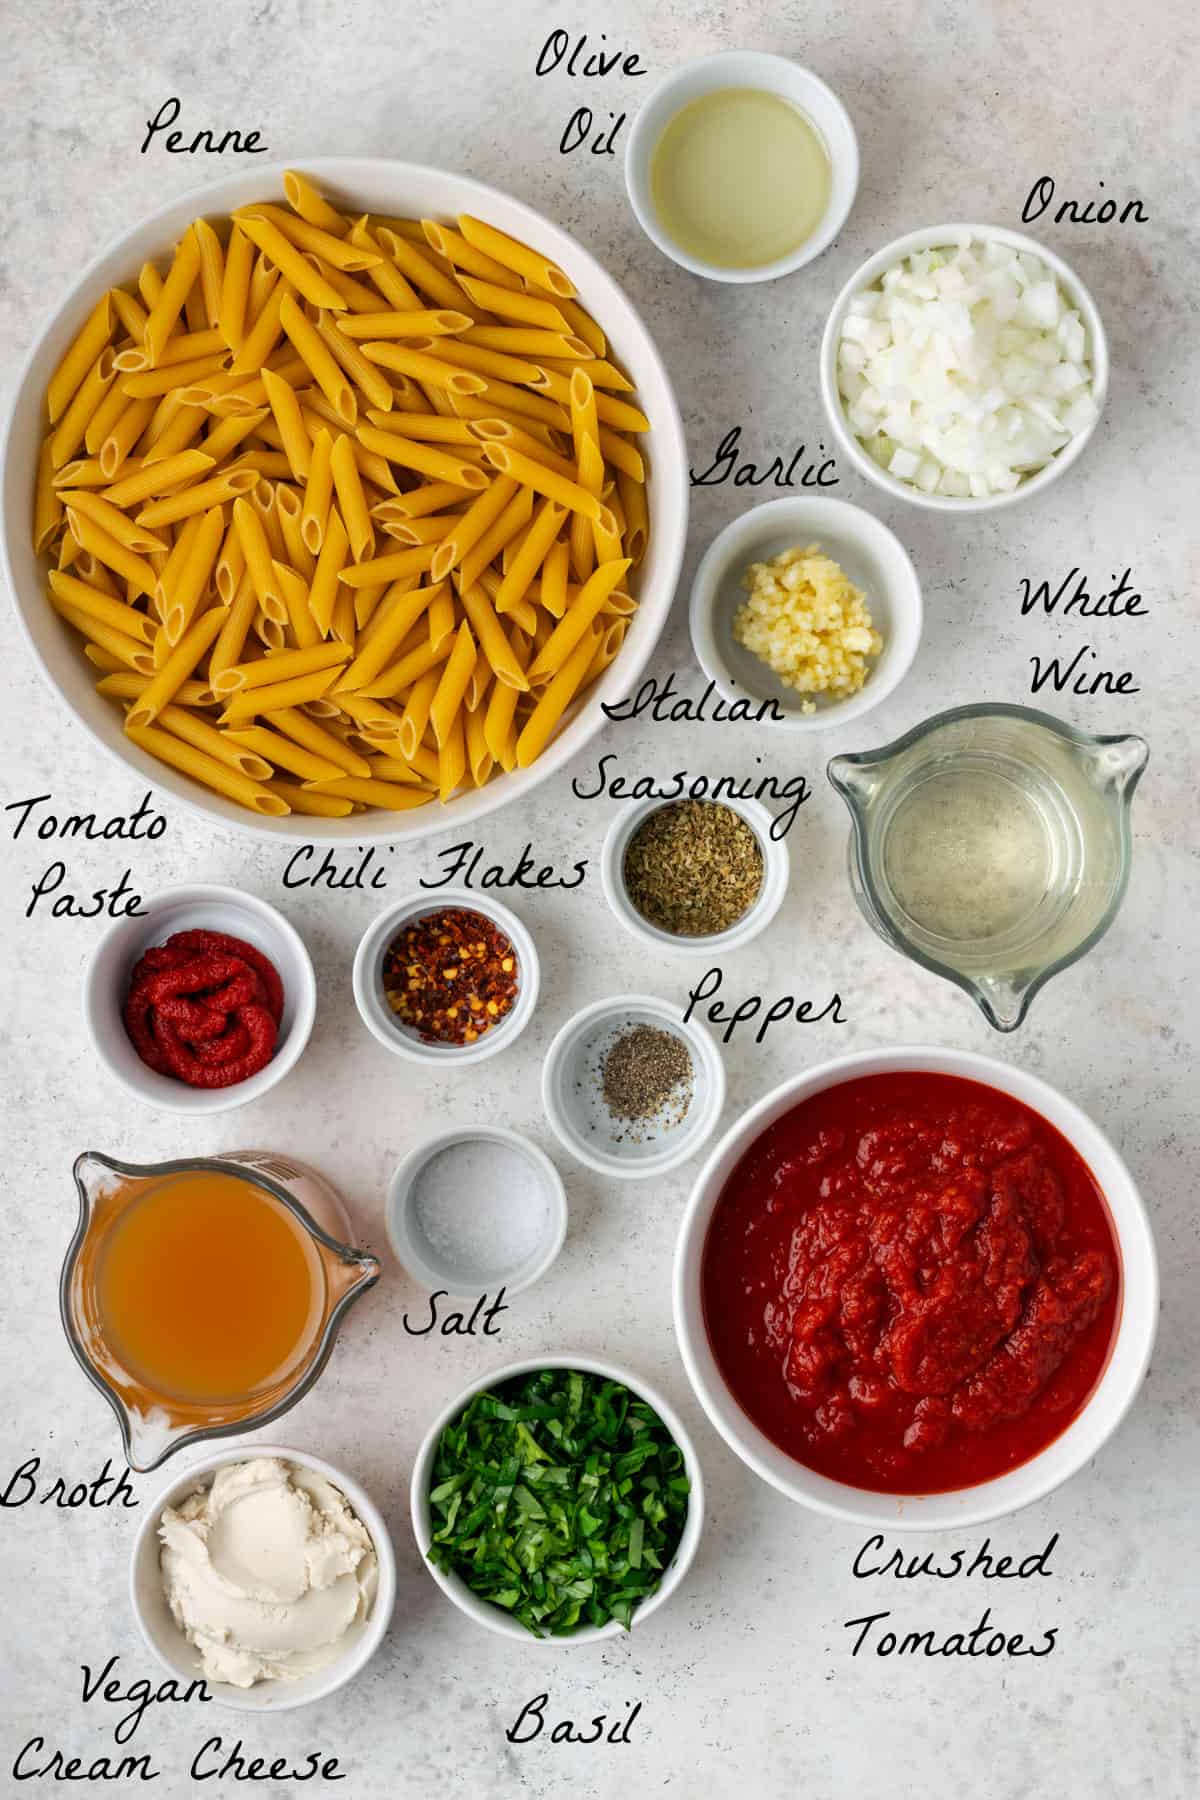 ingredients to make pasta displayed on a stone table top.